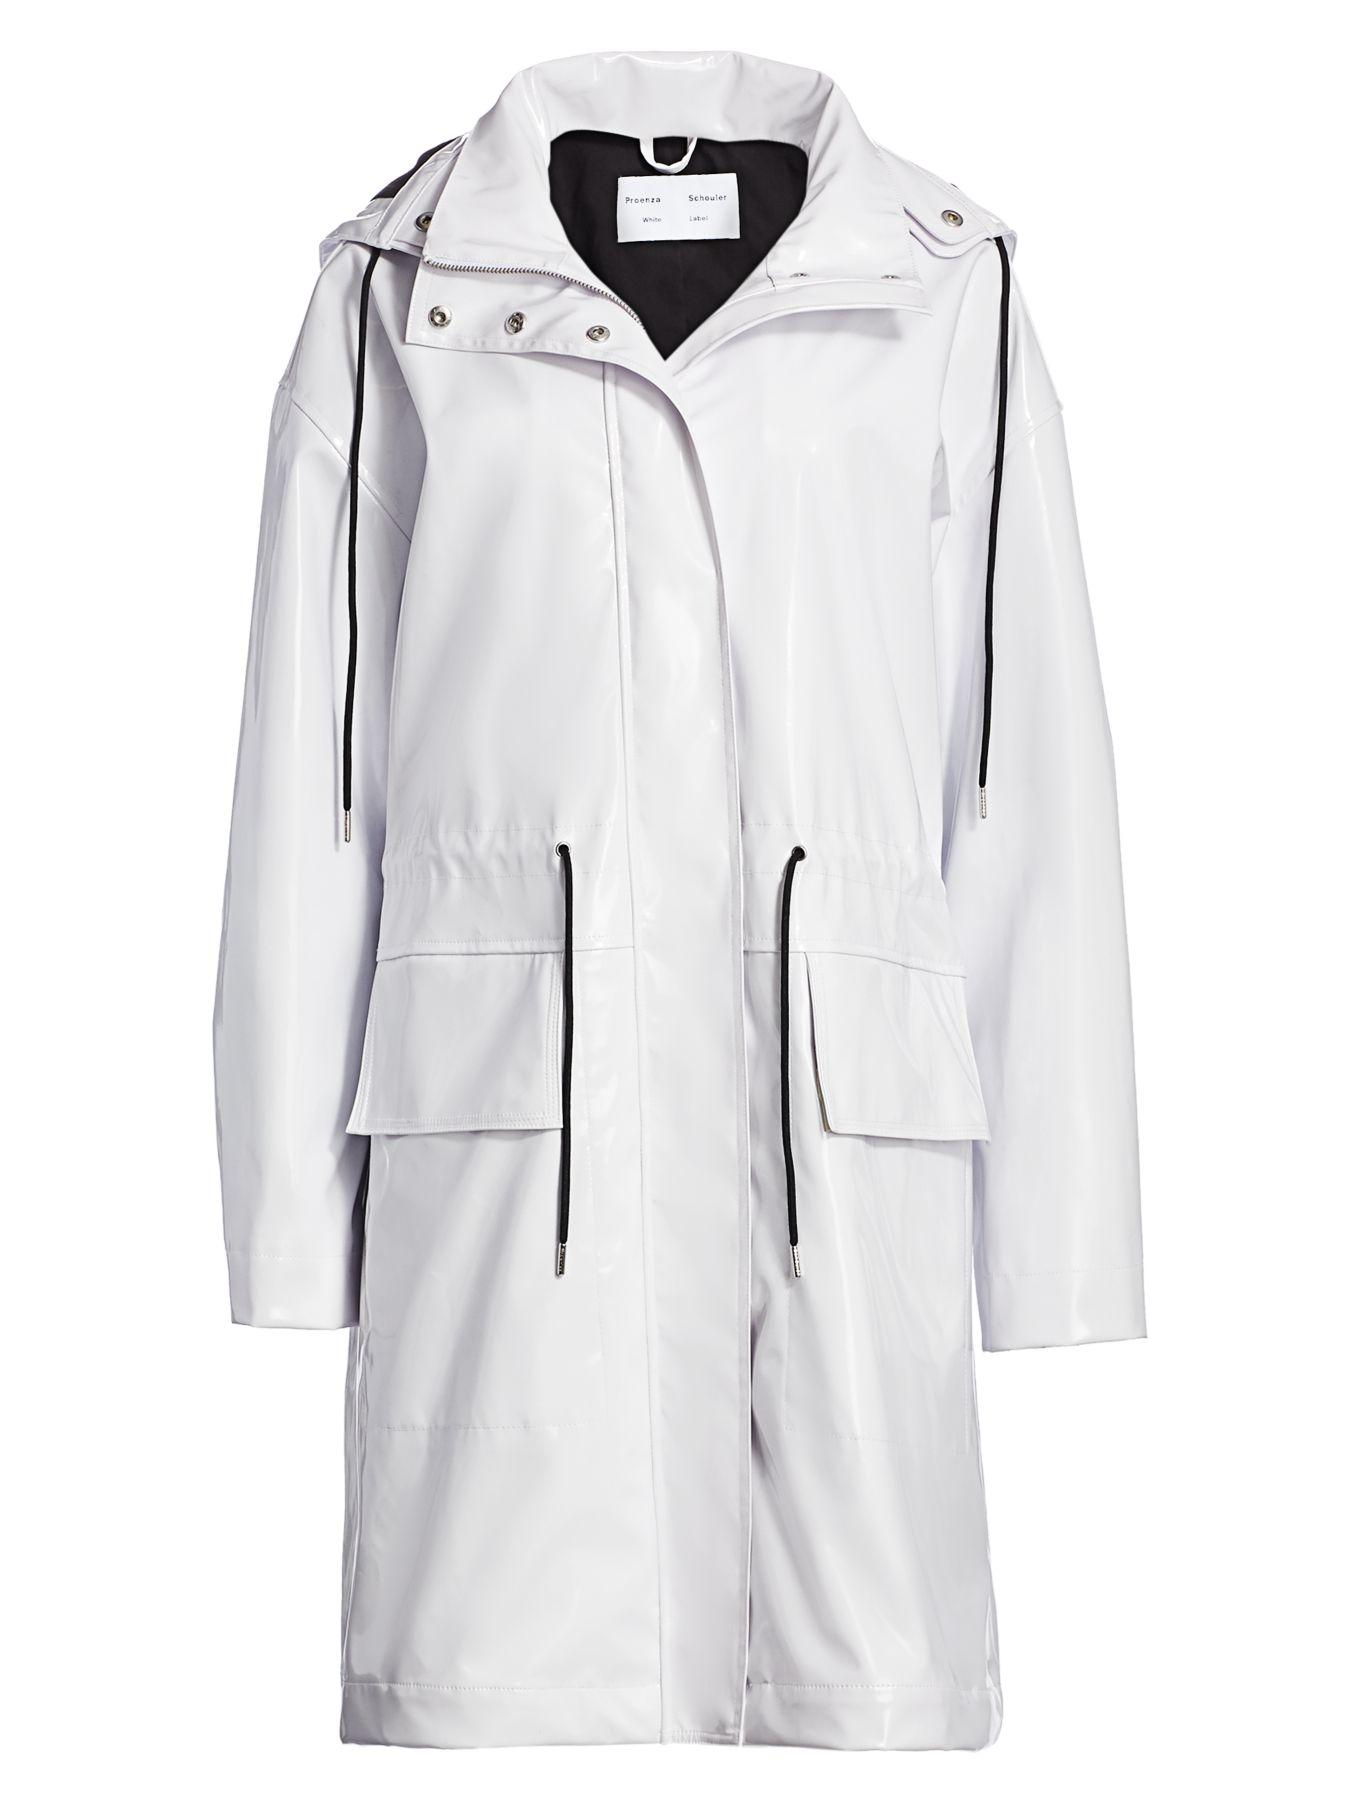 PROENZA SCHOULER WHITE LABEL Glossy Hooded Raincoat in White - Save 73% ...